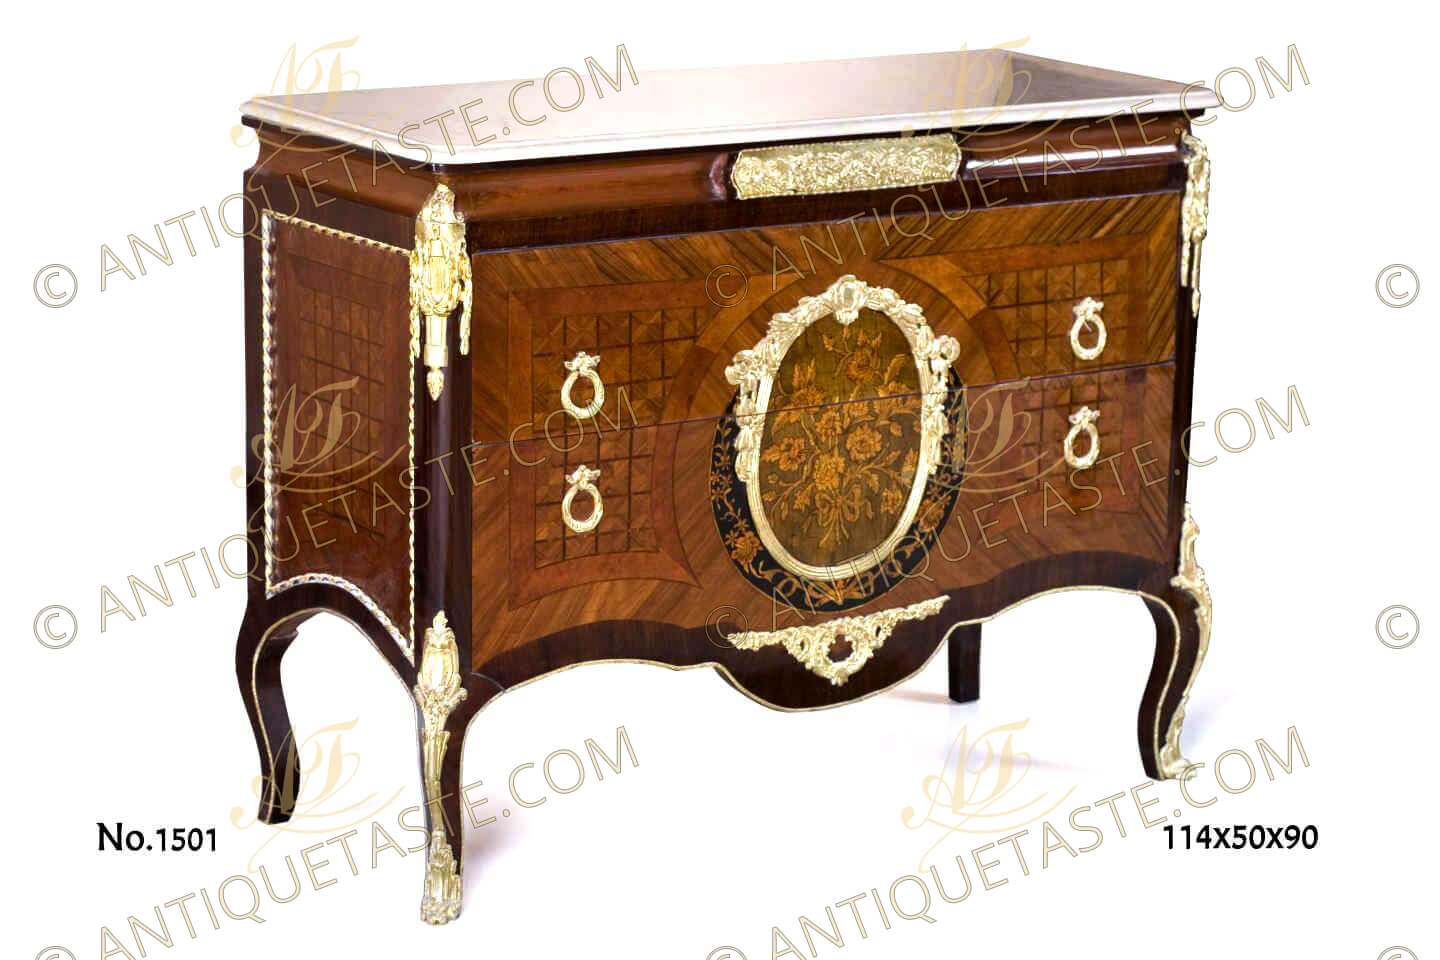 French Louis XV style ormolu mounted parquetry and marquetry veneer inlaid commode on the manner of Haentges Freres, 19th century, with a beautiful beveled white marble top above a concave frieze centered with an ormolu plaque of playful cherubs above a two wide drawers inlaid with parquetry style veneer, centered with marquetry flowers bouquet encircled with a gilt-ormolu foliate trim mount surrounded with an ebonized crescent inlaid with marquetry pattern of a ribbon tied trellis above a scroll shell ormolu mount, the sides inset with parquetry inlay design inside a twisted ormolu frame, the corners are headed with a royal ormolu mounts of a laurel wreath pendant cartouche above a pine cone, the commode stands on cabriole legs ornamented with acanthus ormolu mounts extended to foliate ormolu sabots